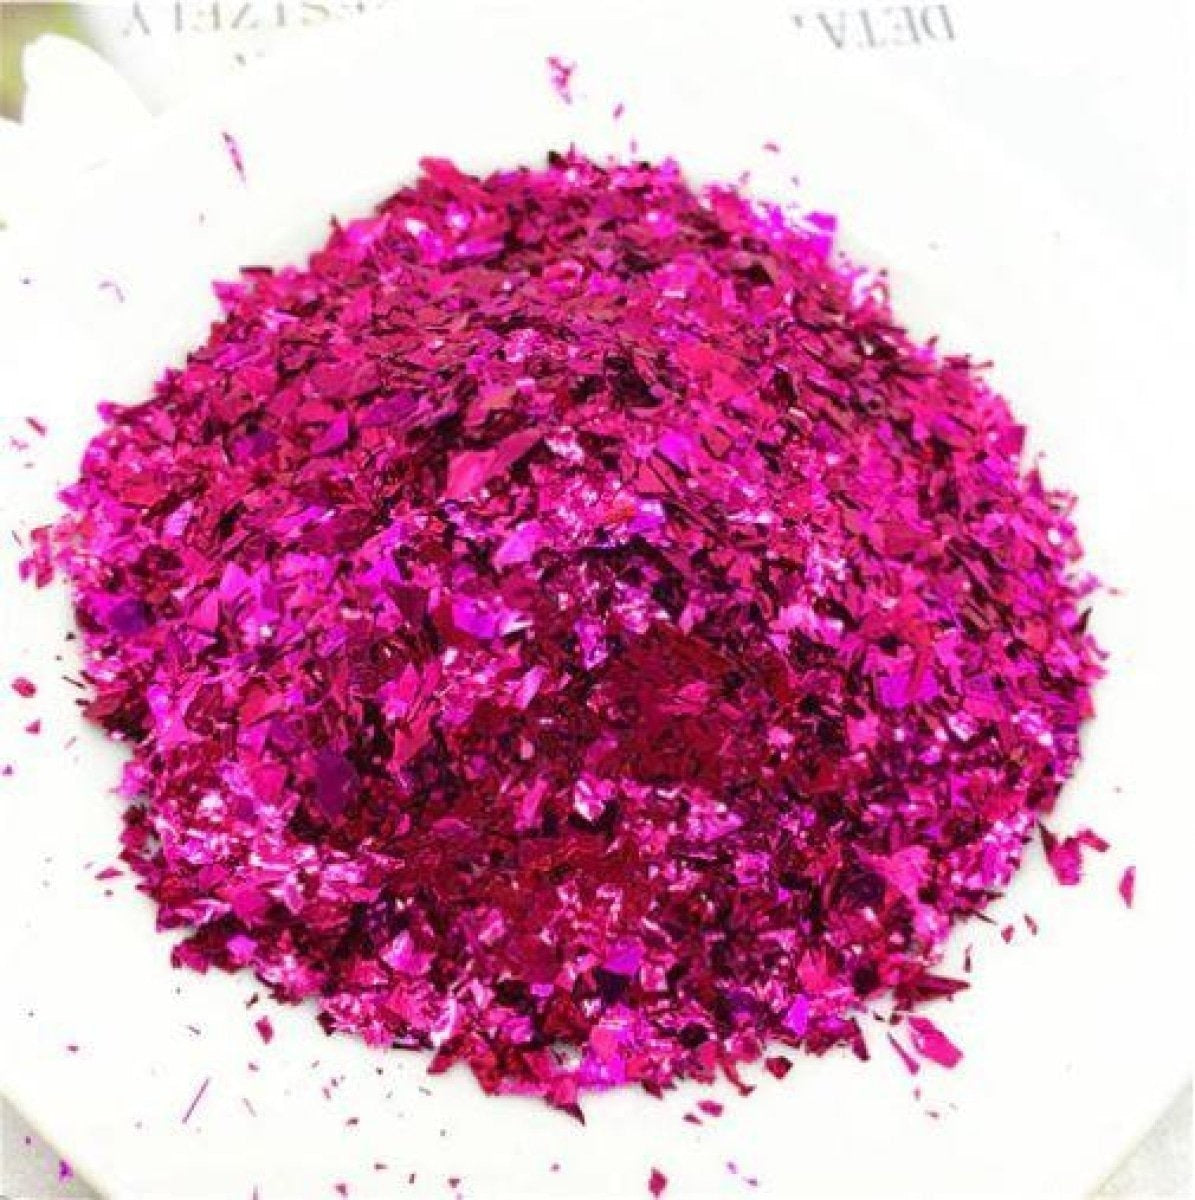 Holographic Nail Decoration Flakes Glitter Diy Art 3D Sequin Rose Red/purple -